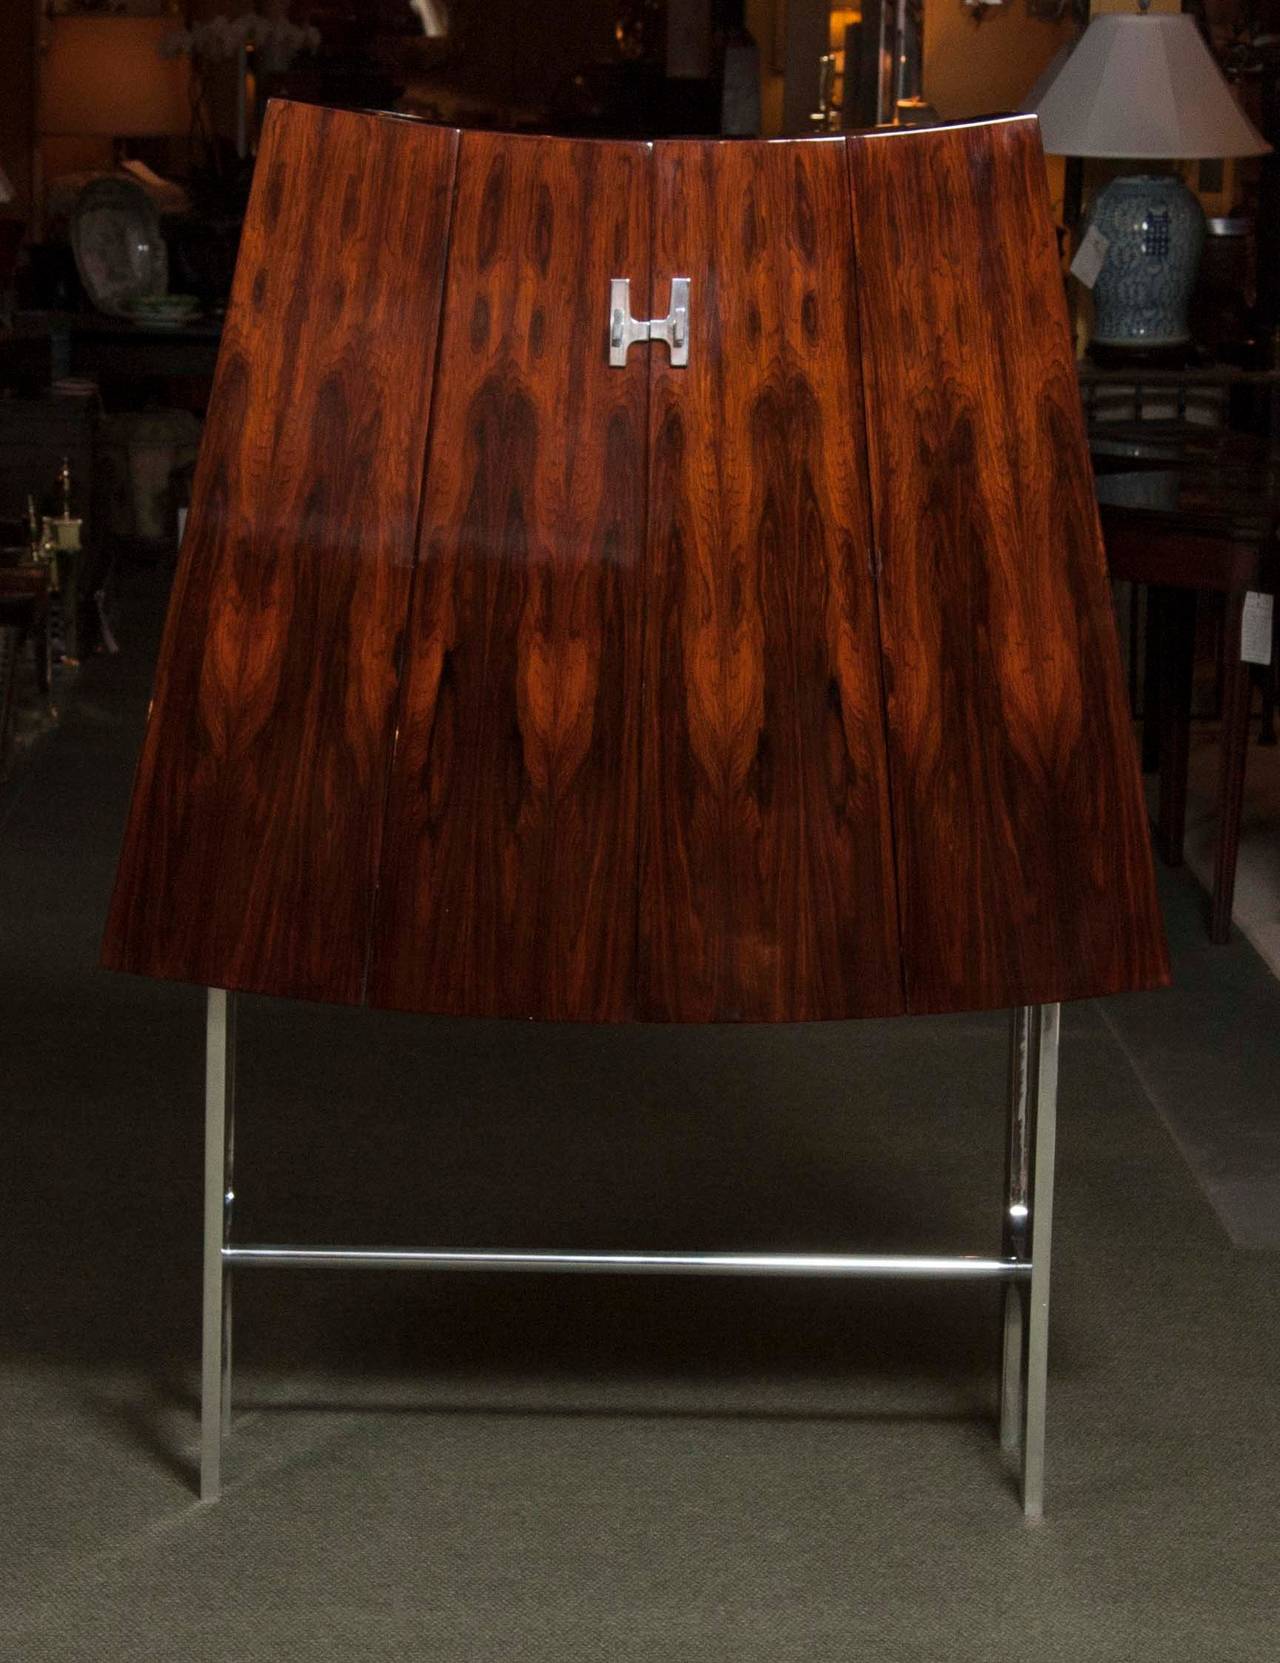 A fabulous pair of tapered rosewood cabinets on nickel-plated stands attributed to René Jean Caillette (1919-2004).
The son of a woodworker, Caillette always intended to follow in his father's footsteps, but not in exactly the same way. For him,